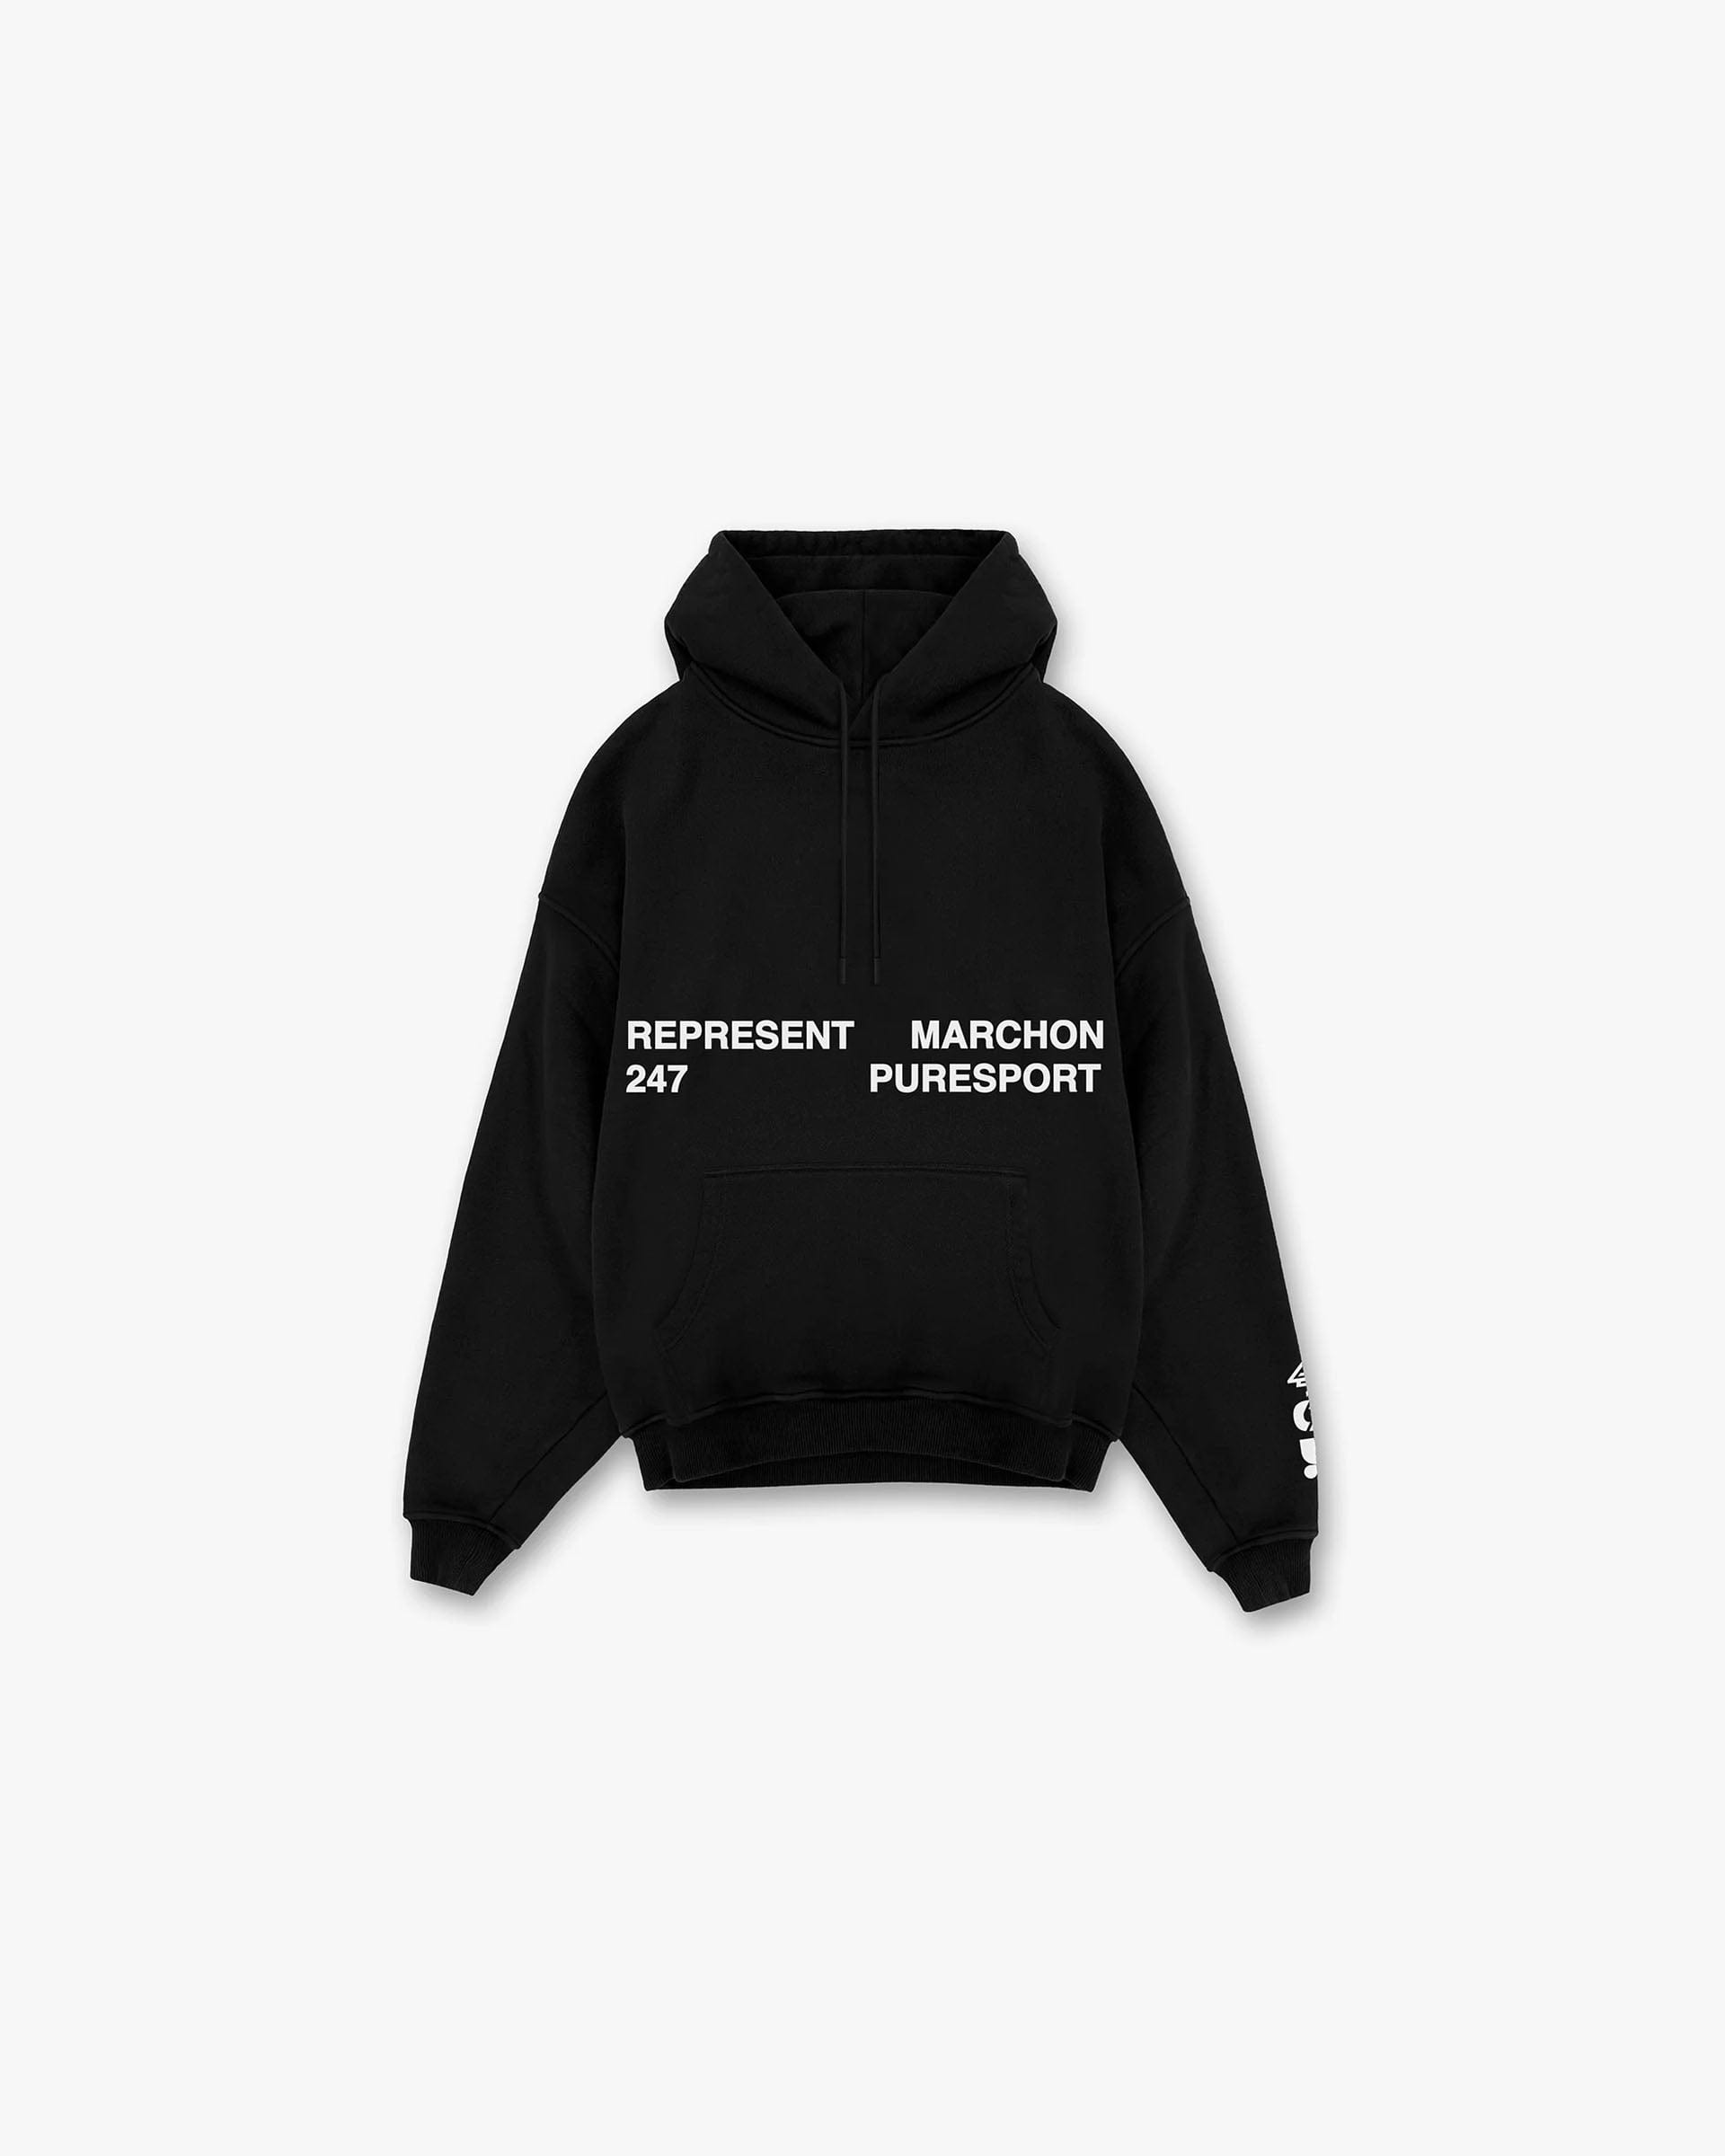 Question for anyone who's owned this bling hoodie : r/VETEMENTS